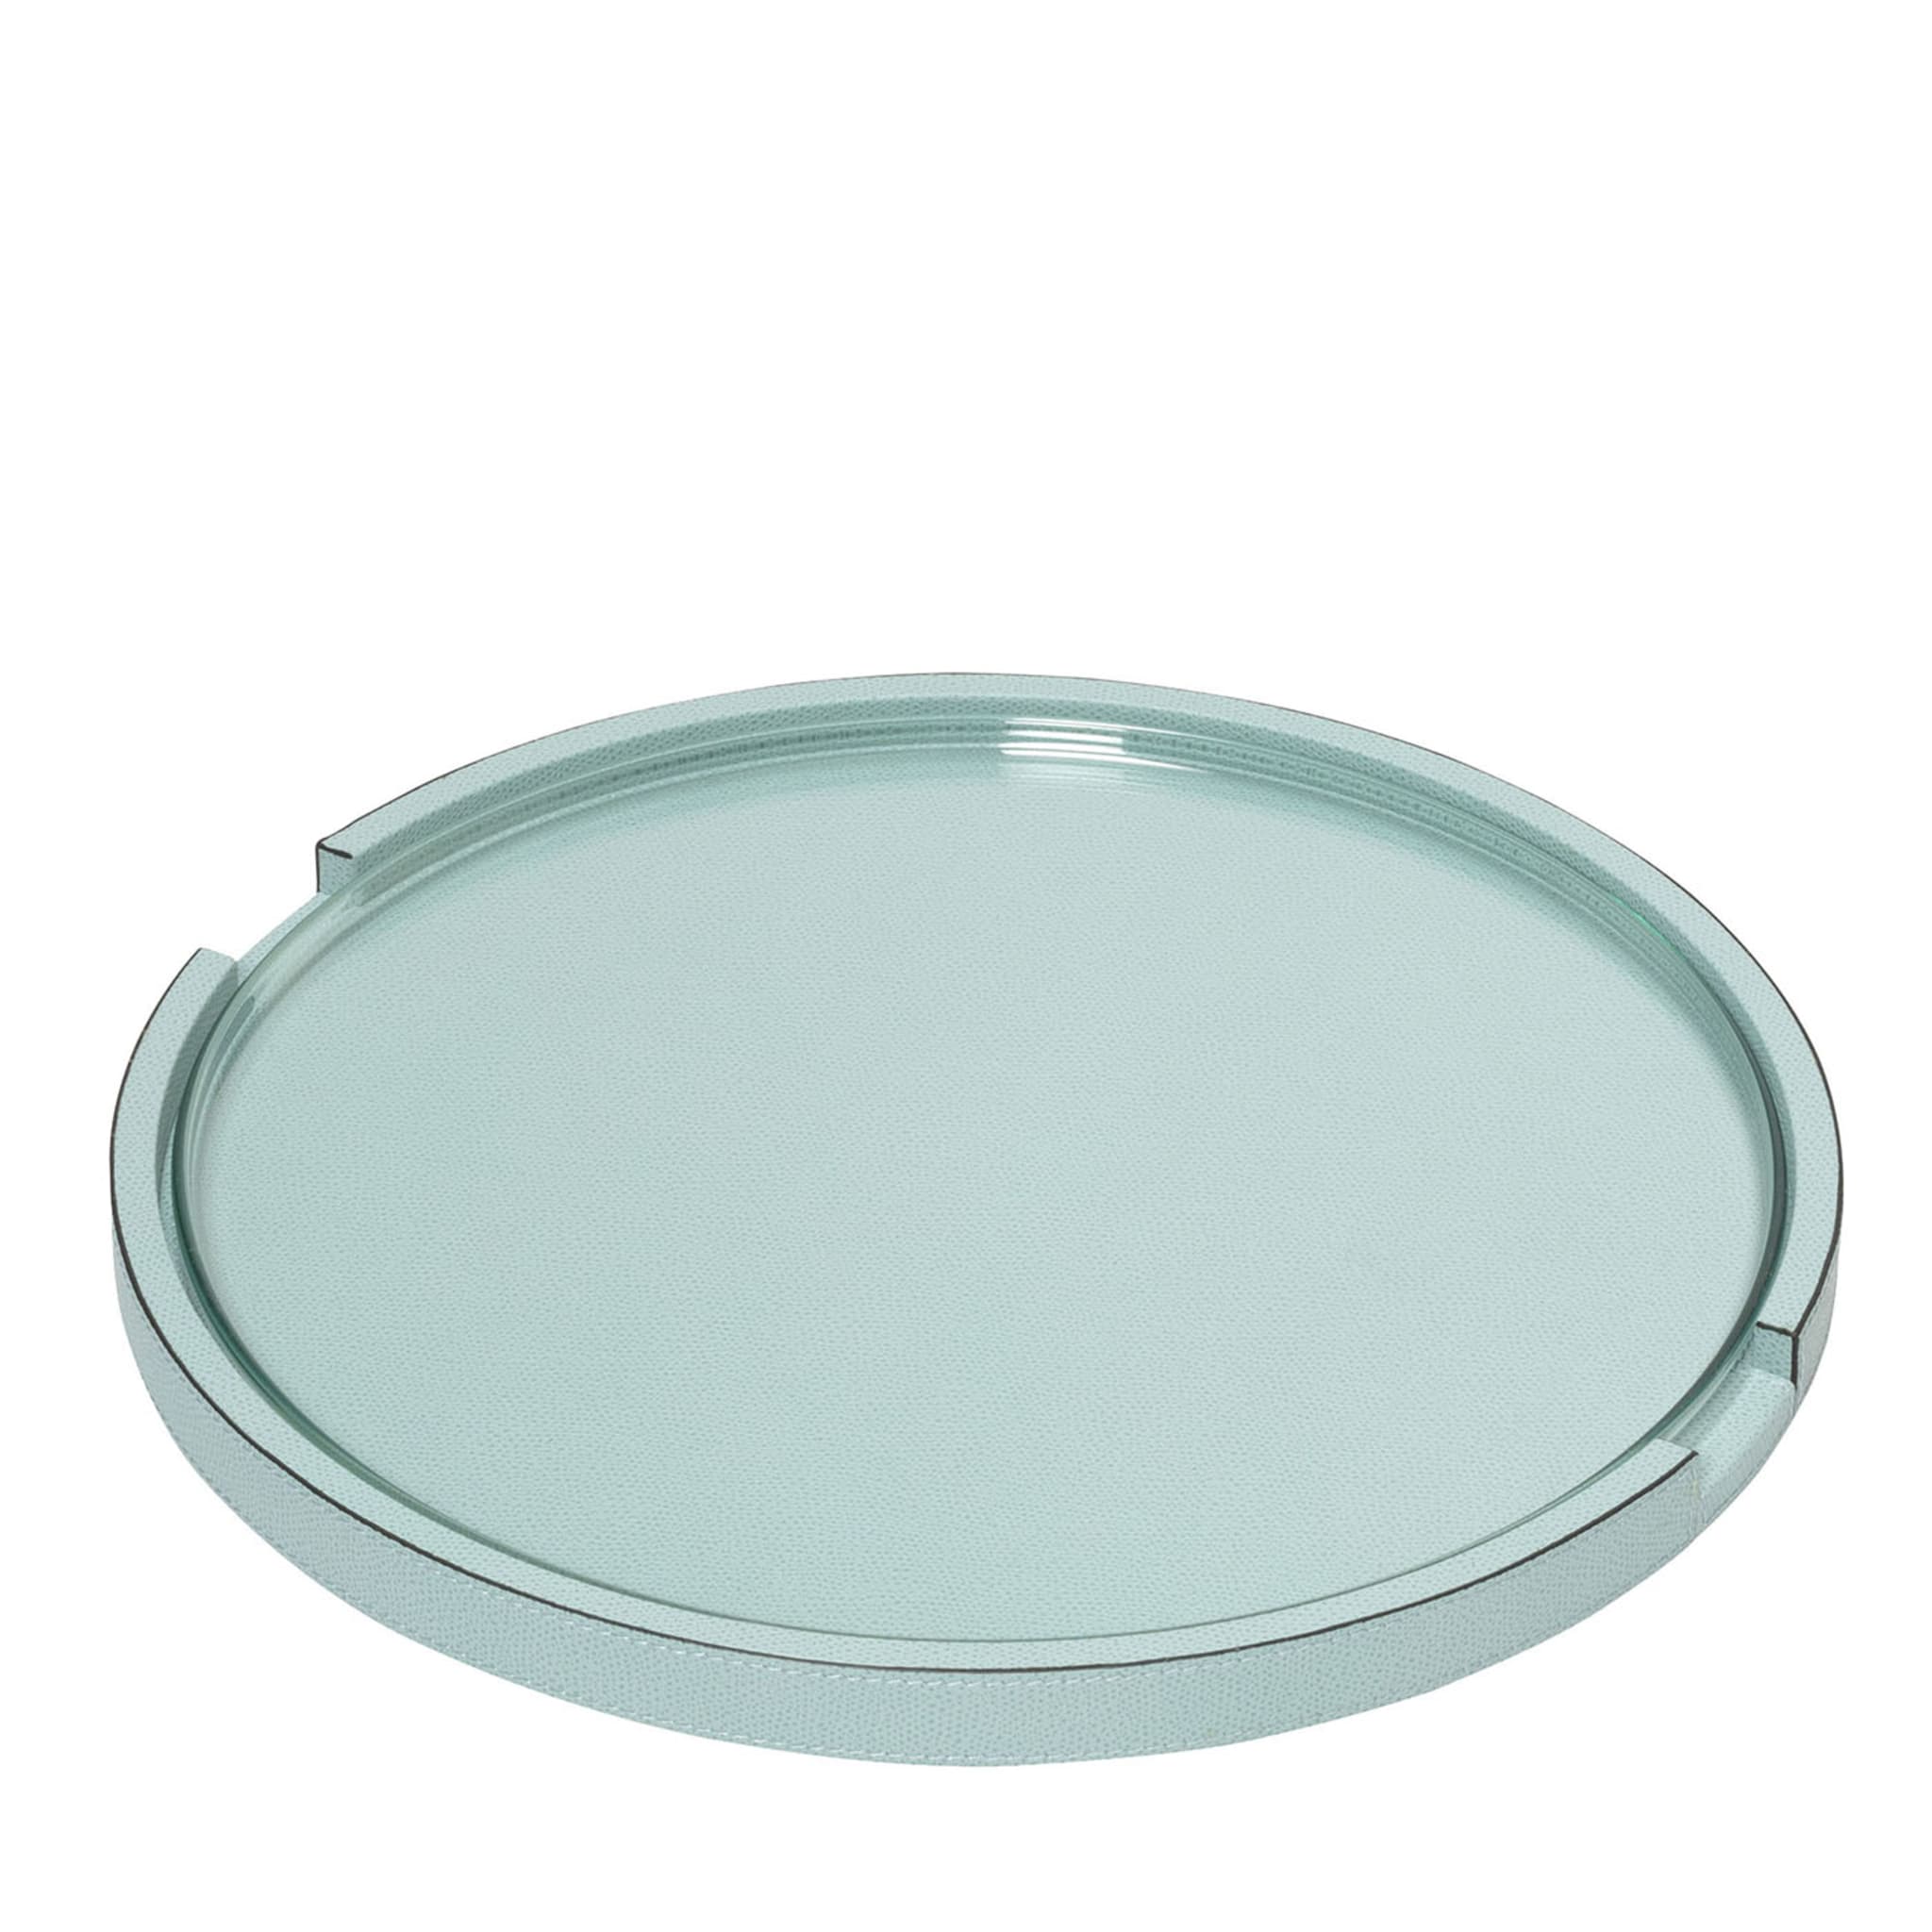 Gourmet Round Serving Tray #2 - Main view